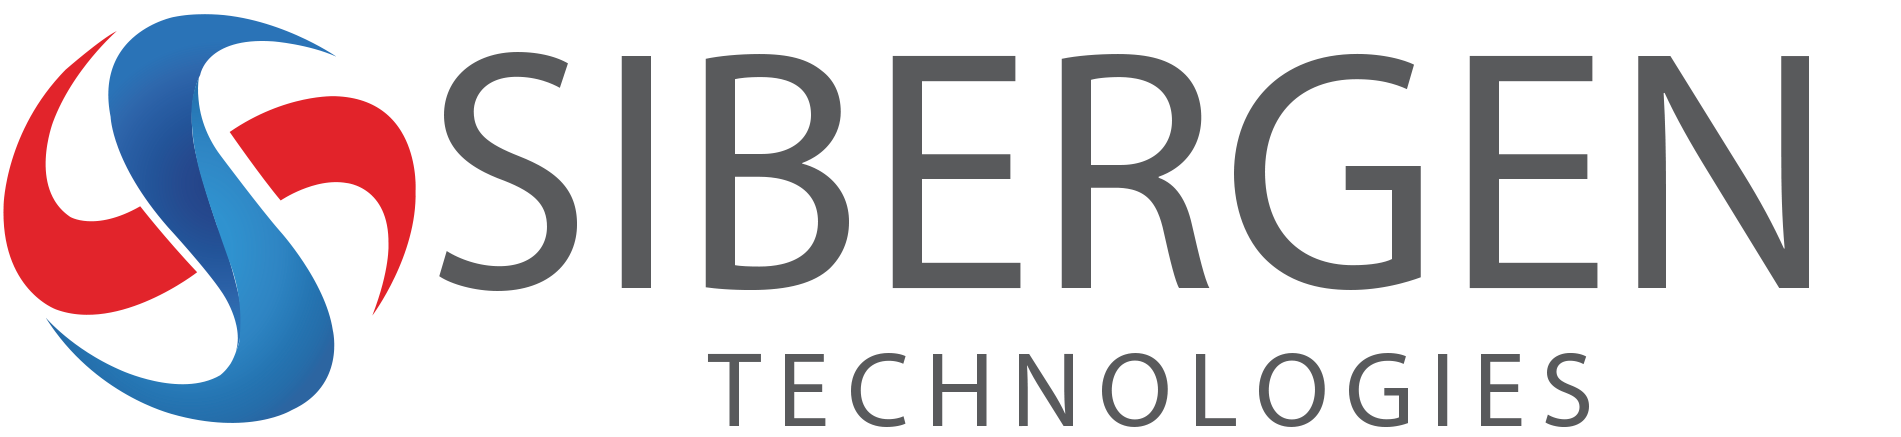 SIBERGEN Technologies profile on Qualified.One